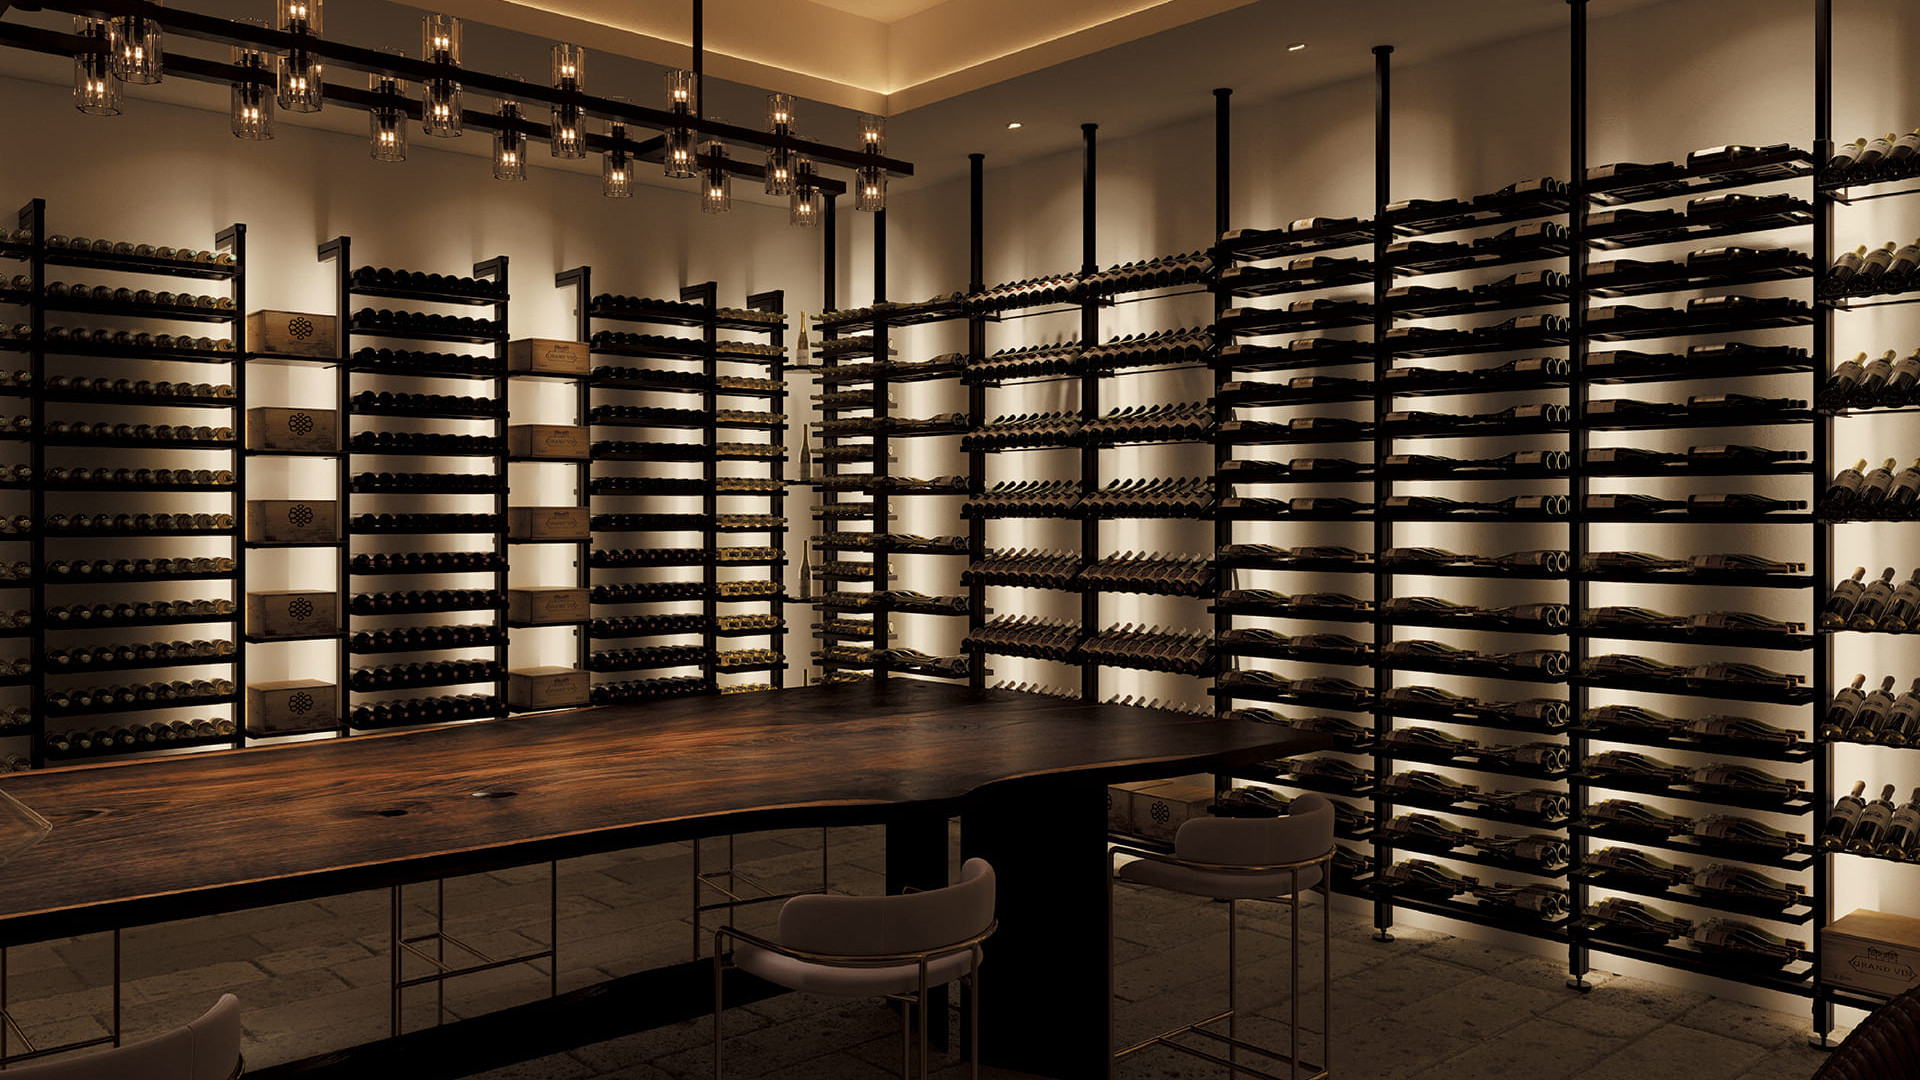 Organize a tasting area with designer shelving modules and professional wine racks which will create an atmosphere conducive to oenological discovery. A paradise for sommeliers and wine lovers.